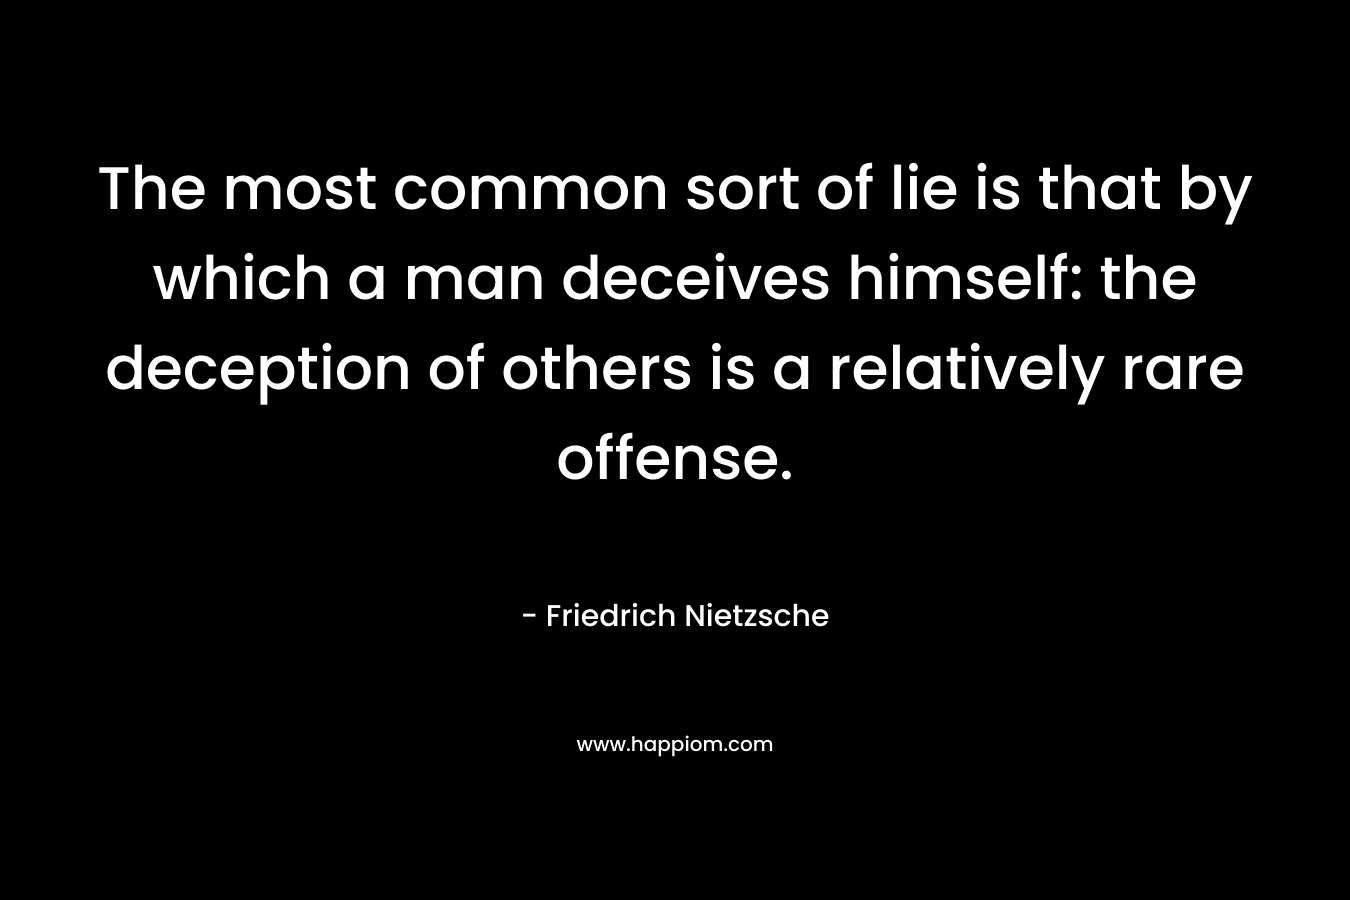 The most common sort of lie is that by which a man deceives himself: the deception of others is a relatively rare offense.